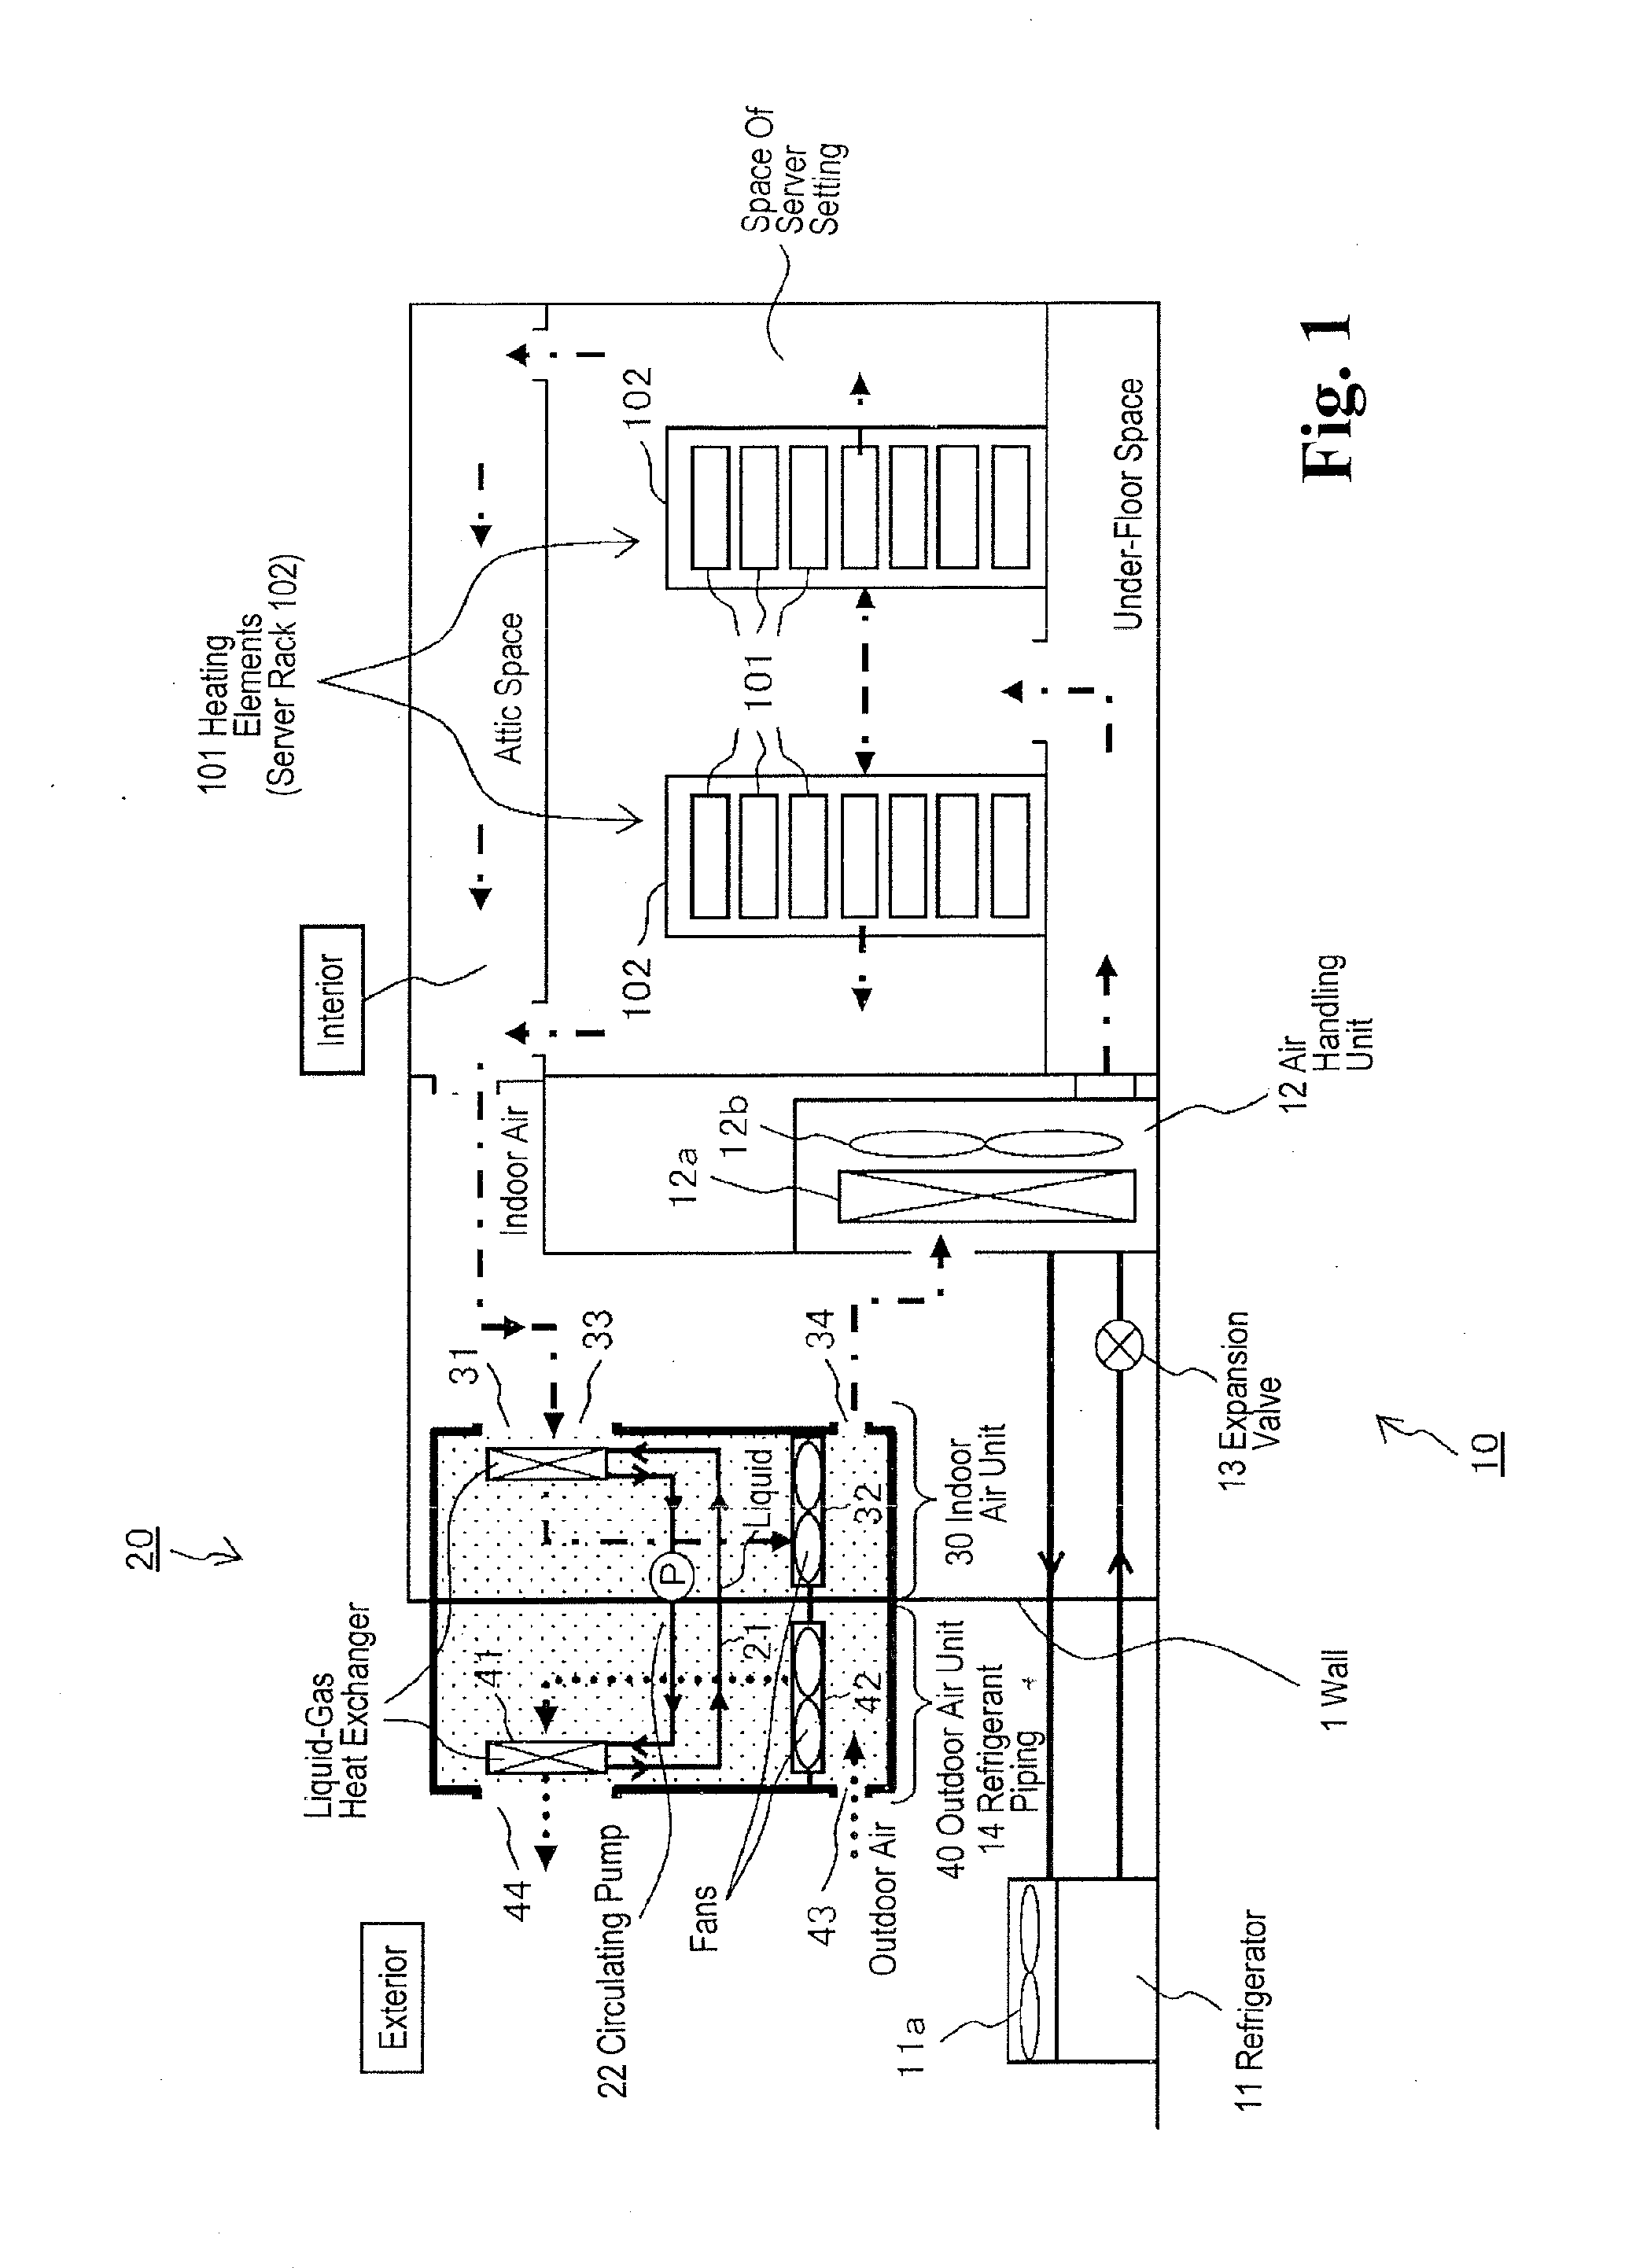 Air conditioning system using outdoor air, indoor air unit, and outdoor air unit thereof, and stack